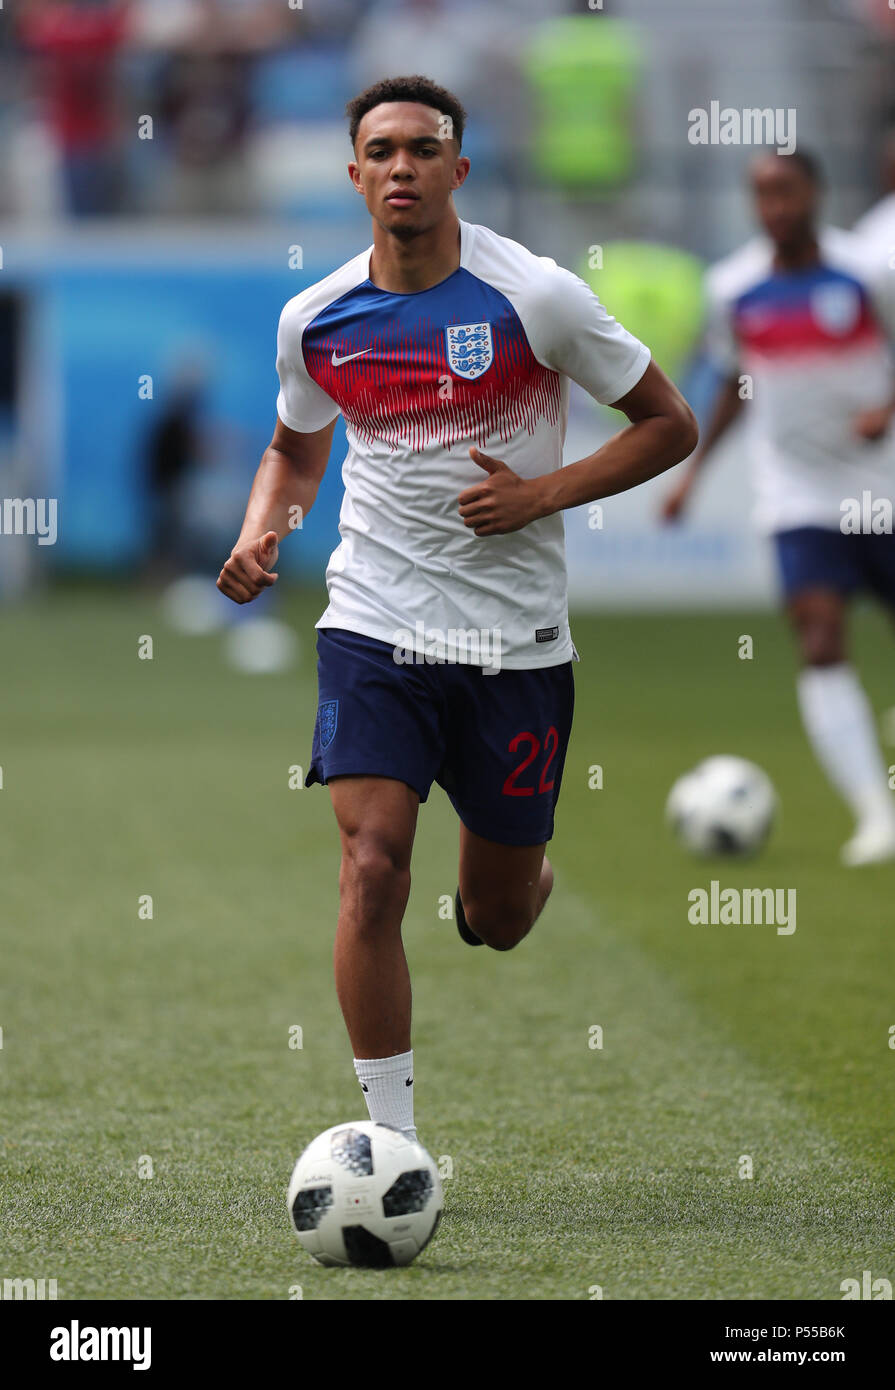 Trent Alexander Arnold England England V Panama 18 Fifa World Cup Russia 24 June 18 Gbc8745 England V Panama 18 Fifa World Cup Russia Strictly Editorial Use Only If The Player Players Depicted In